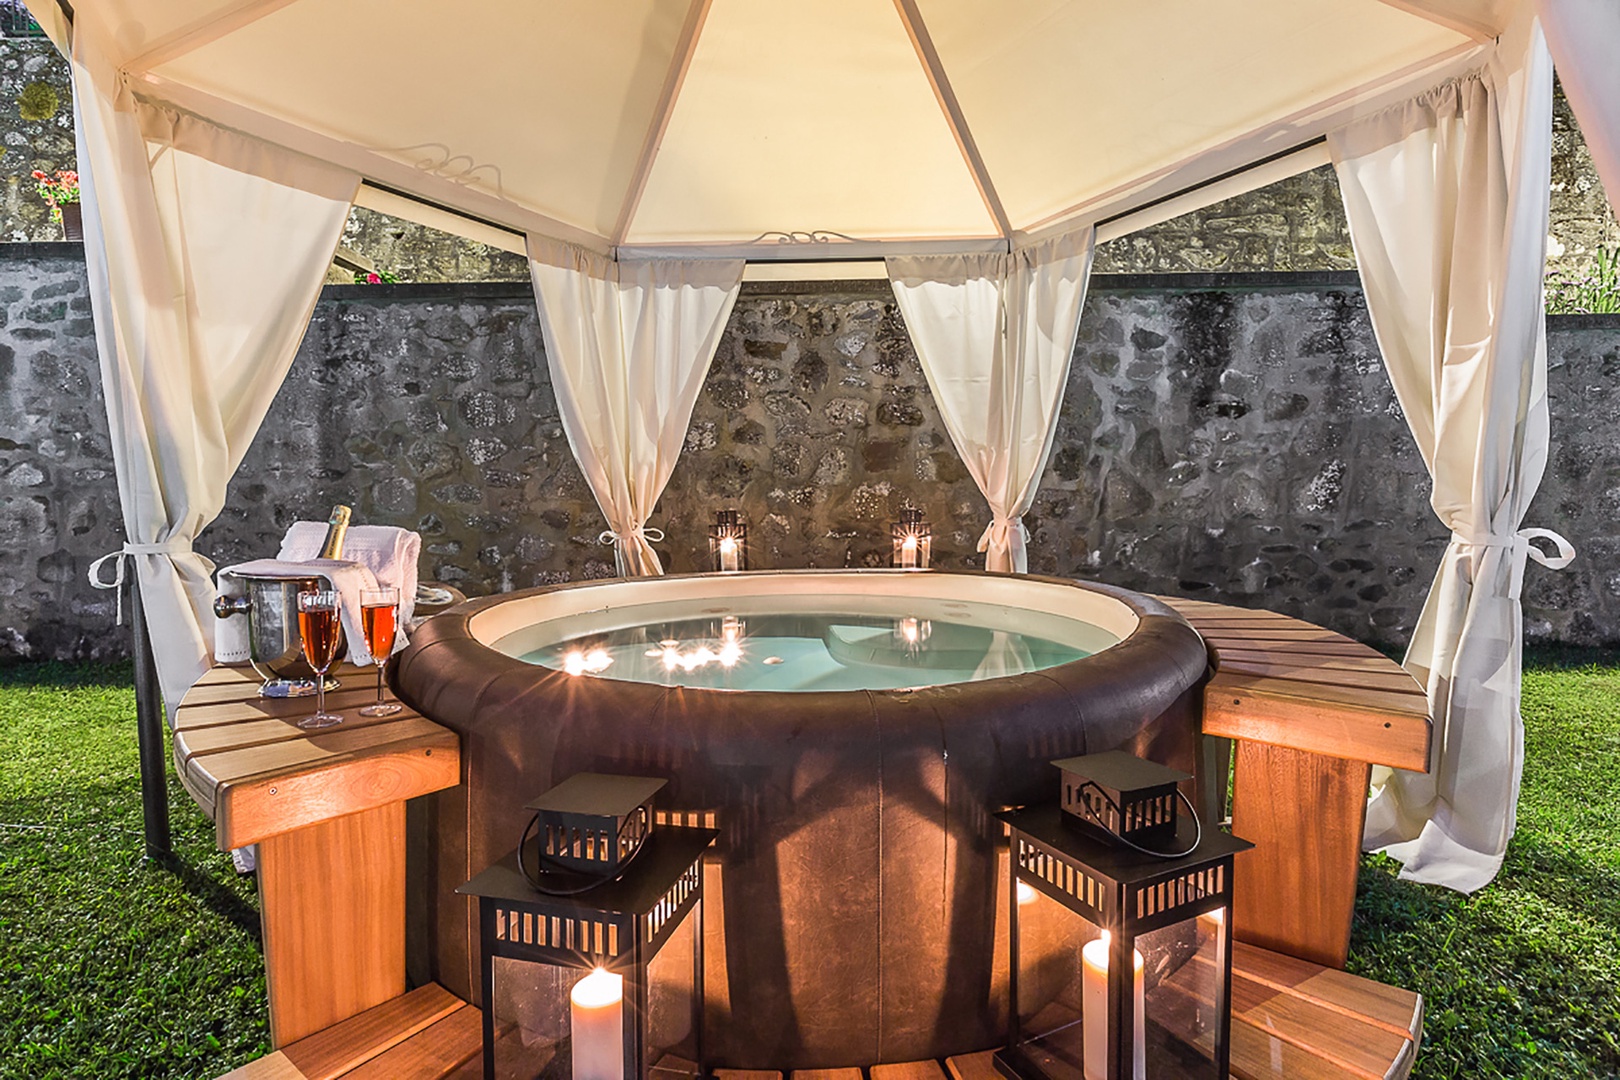 Relax and revitalize in the outdoor Jacuzzi.